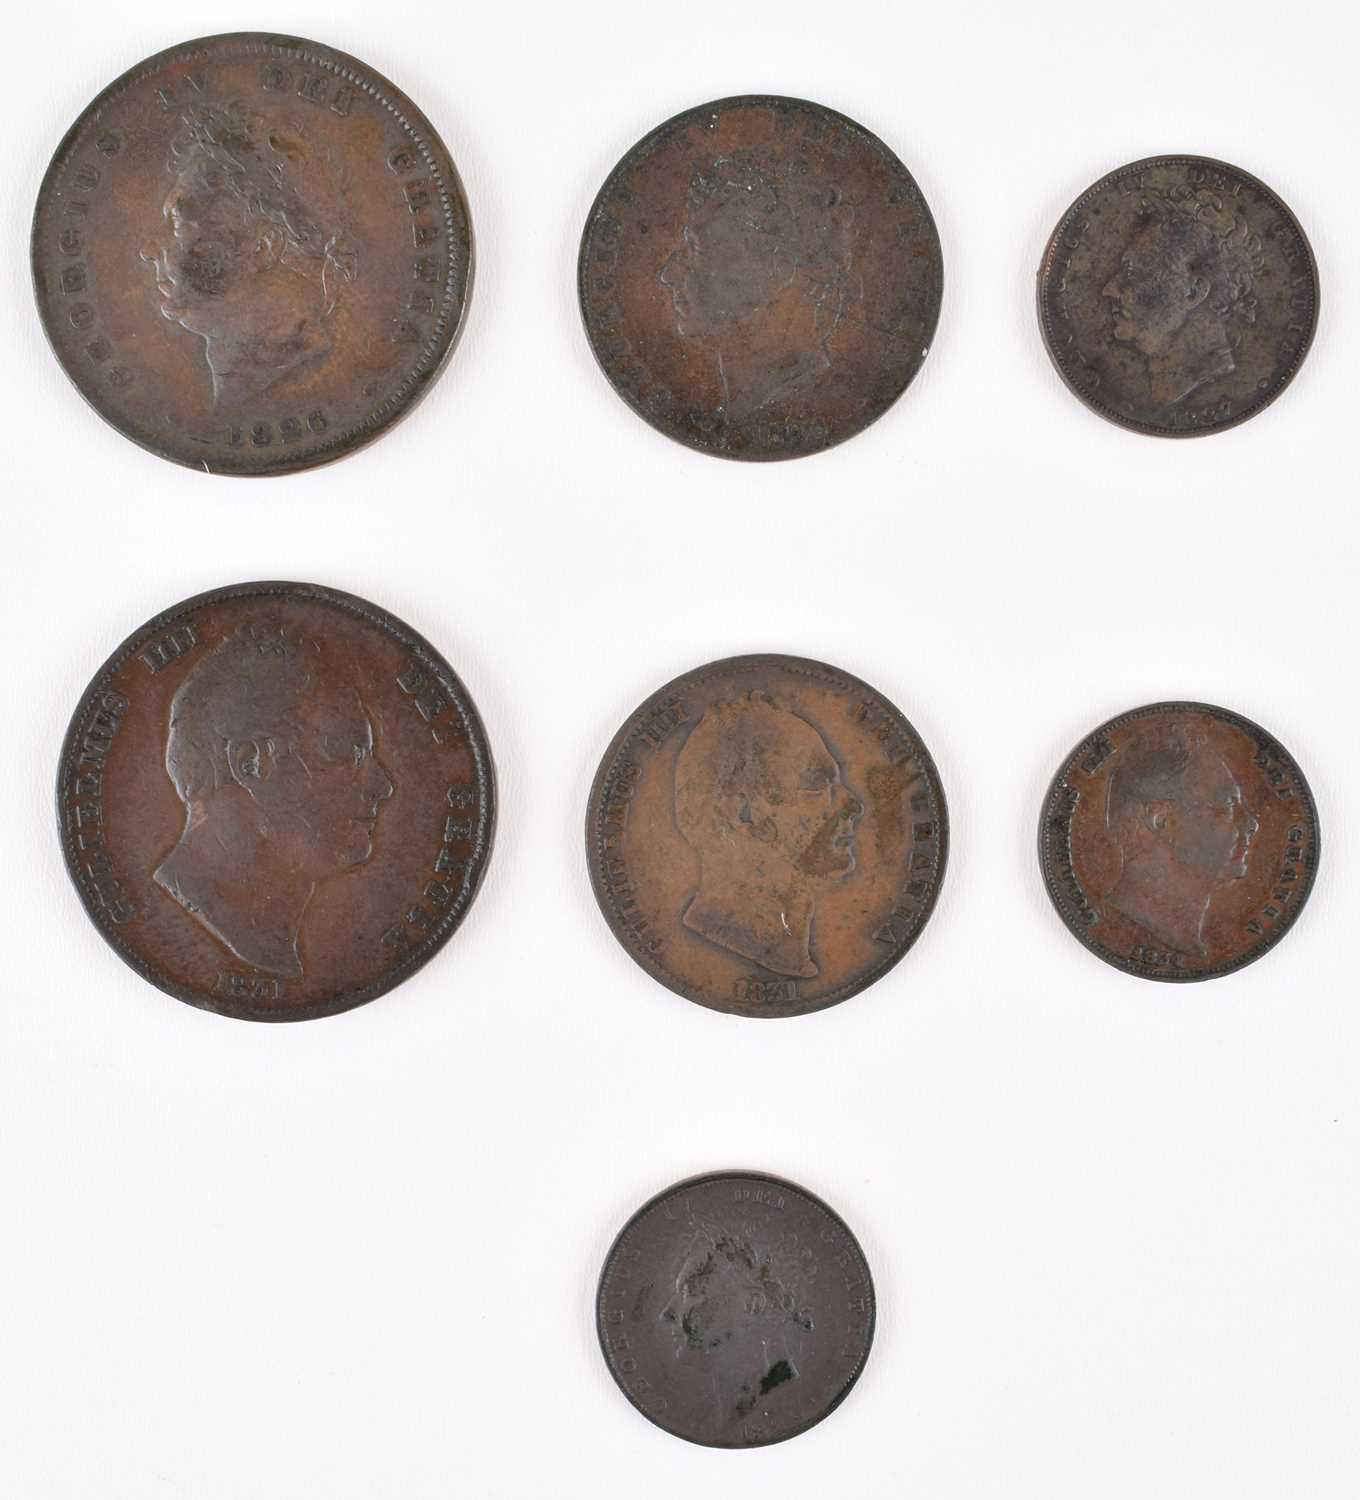 One album of historical British coinage dating from William and Mary through to George V. - Image 11 of 22